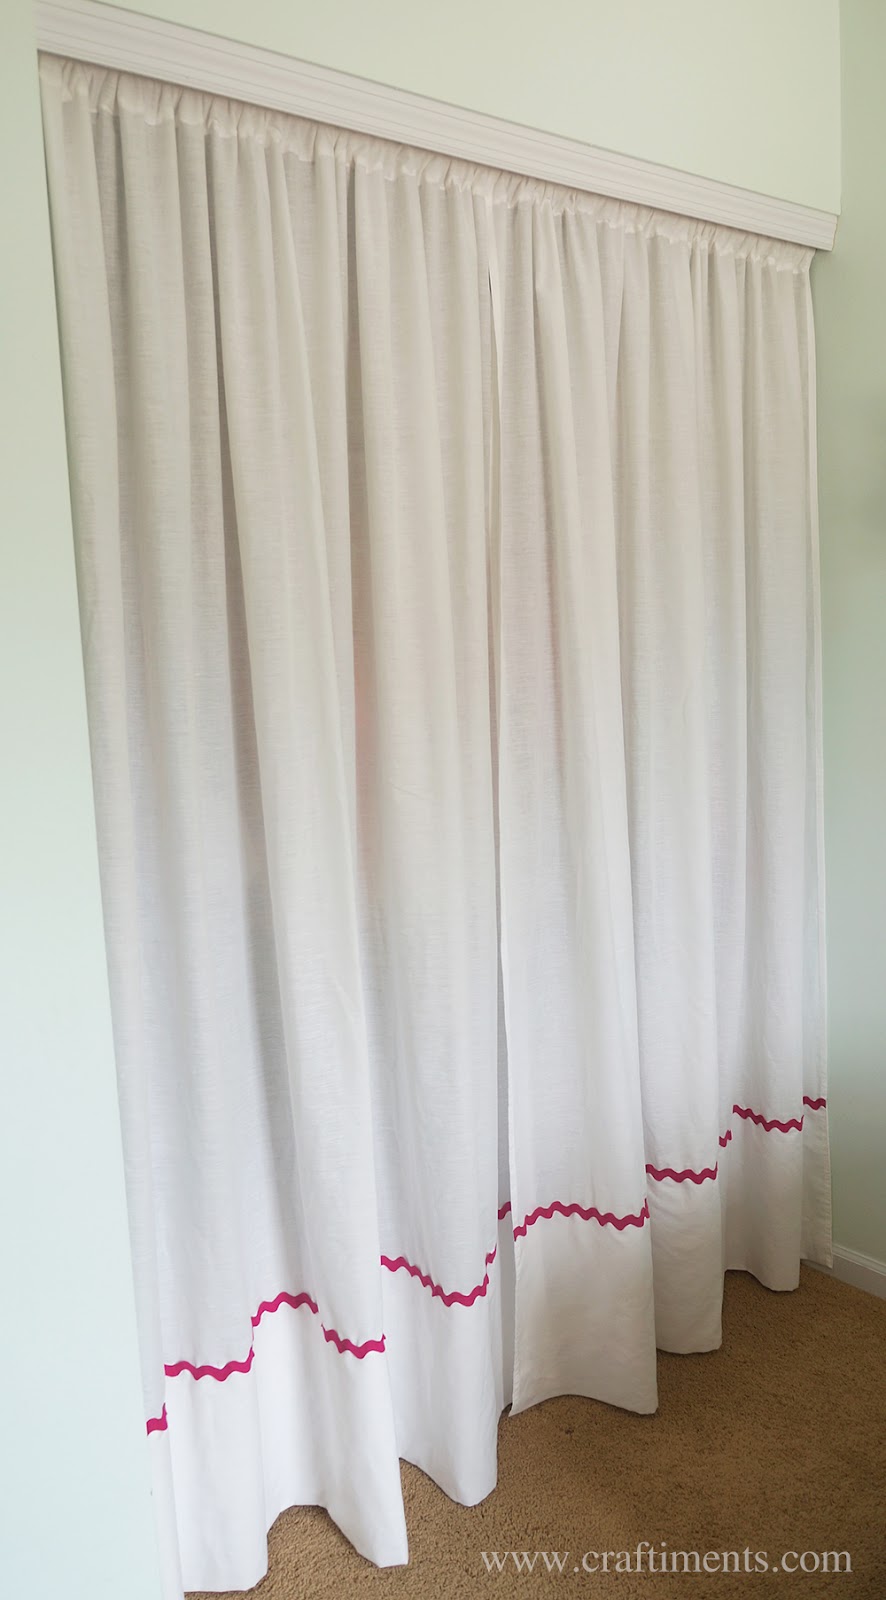 Replace closet doors with curtains sewn from bed sheets.